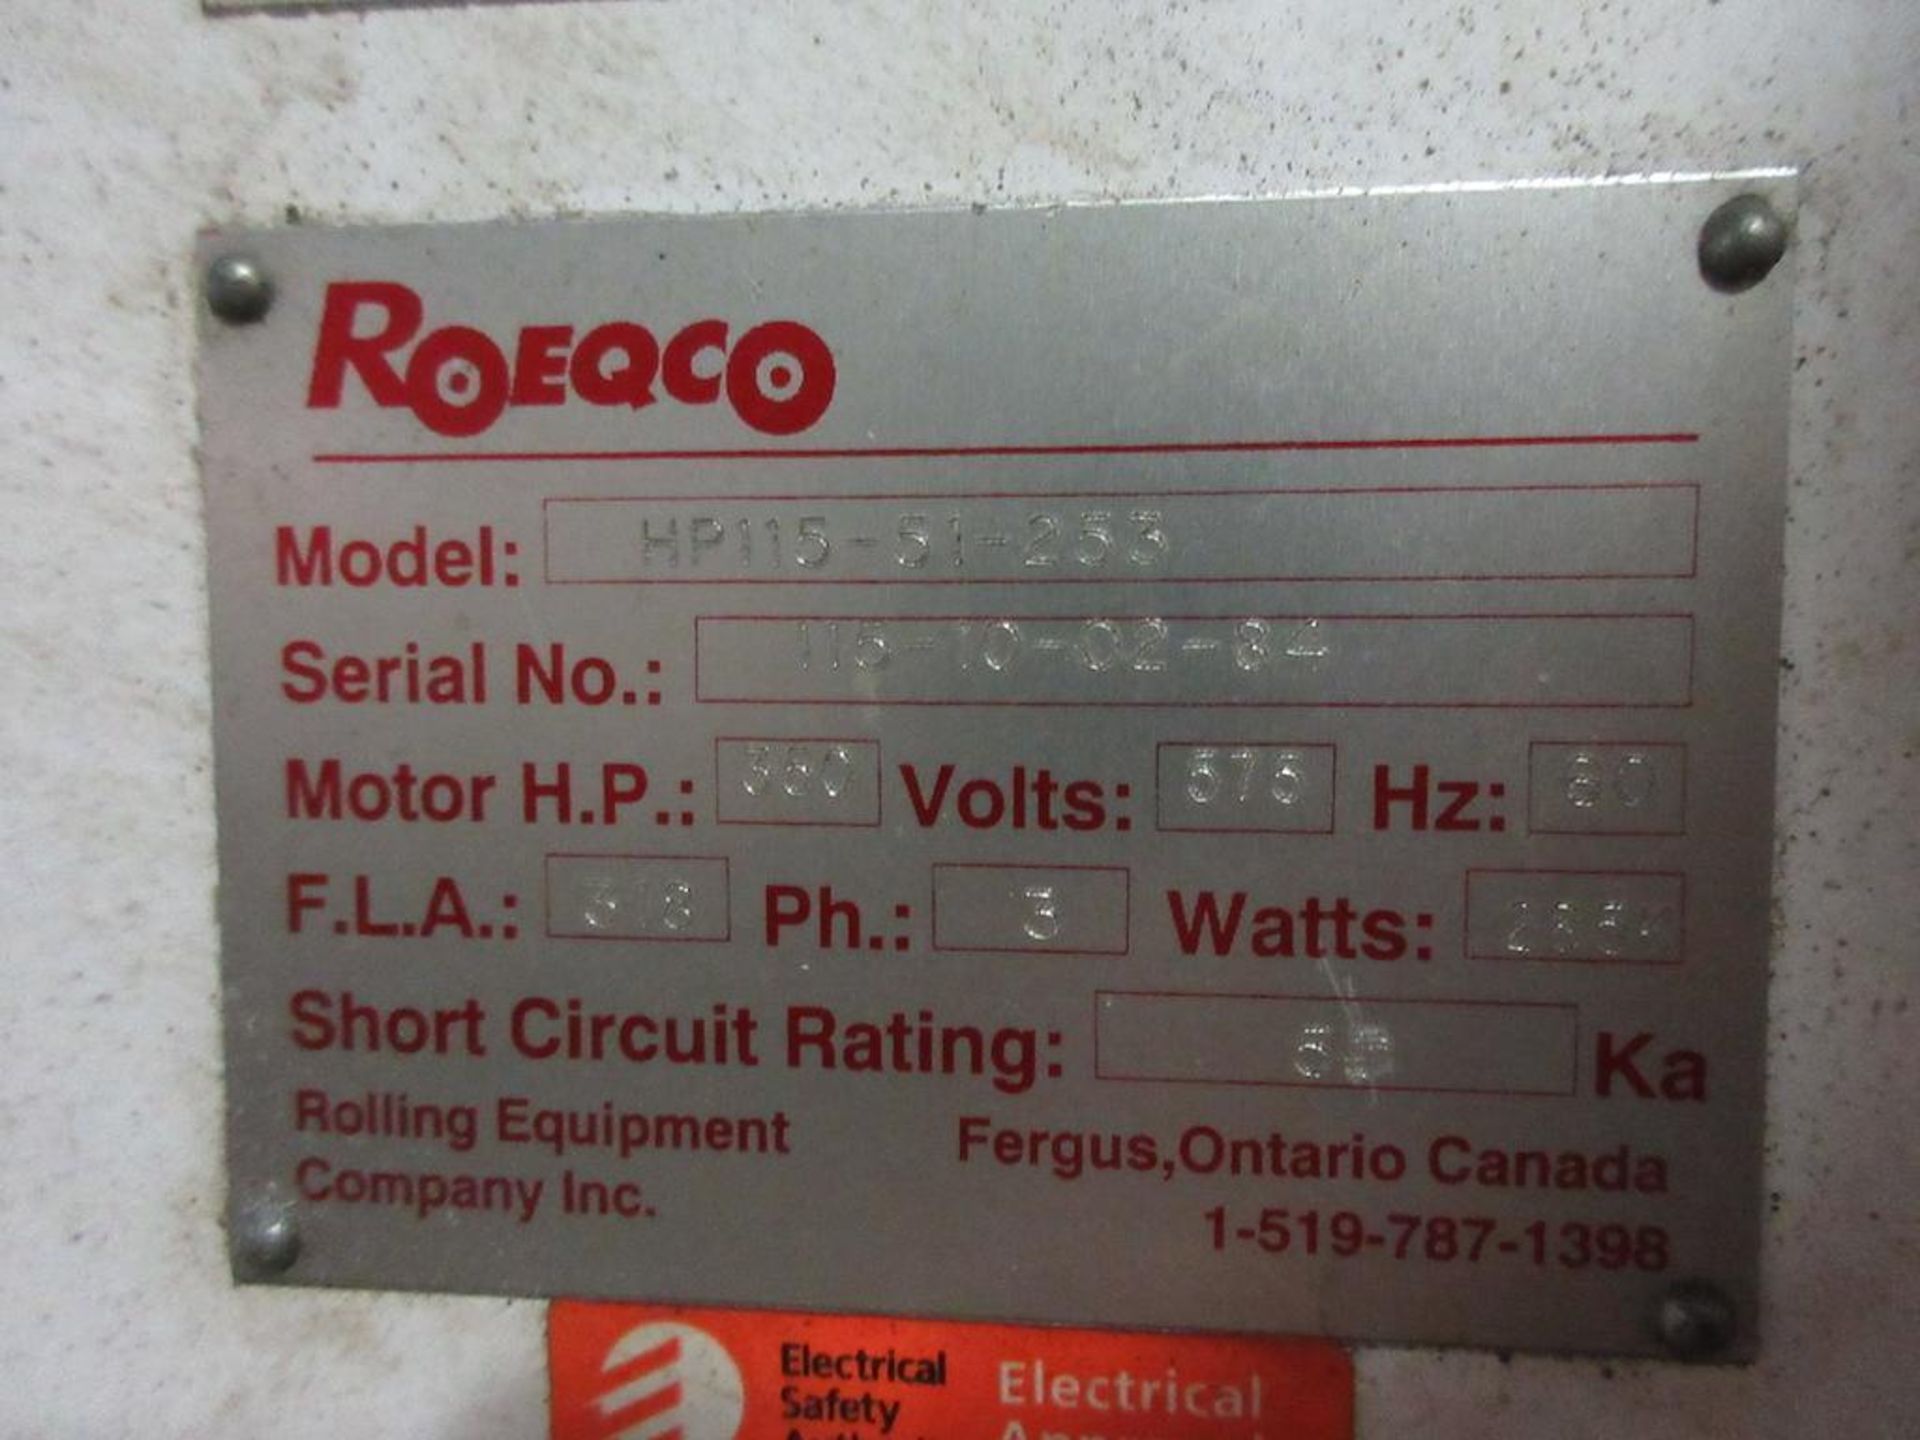 ROEQCO (Rolling Equipment Company Inc) Densifier, Model HP115-51-253, 350 HP, 600V, sn 115-10-02-84, - Image 4 of 20